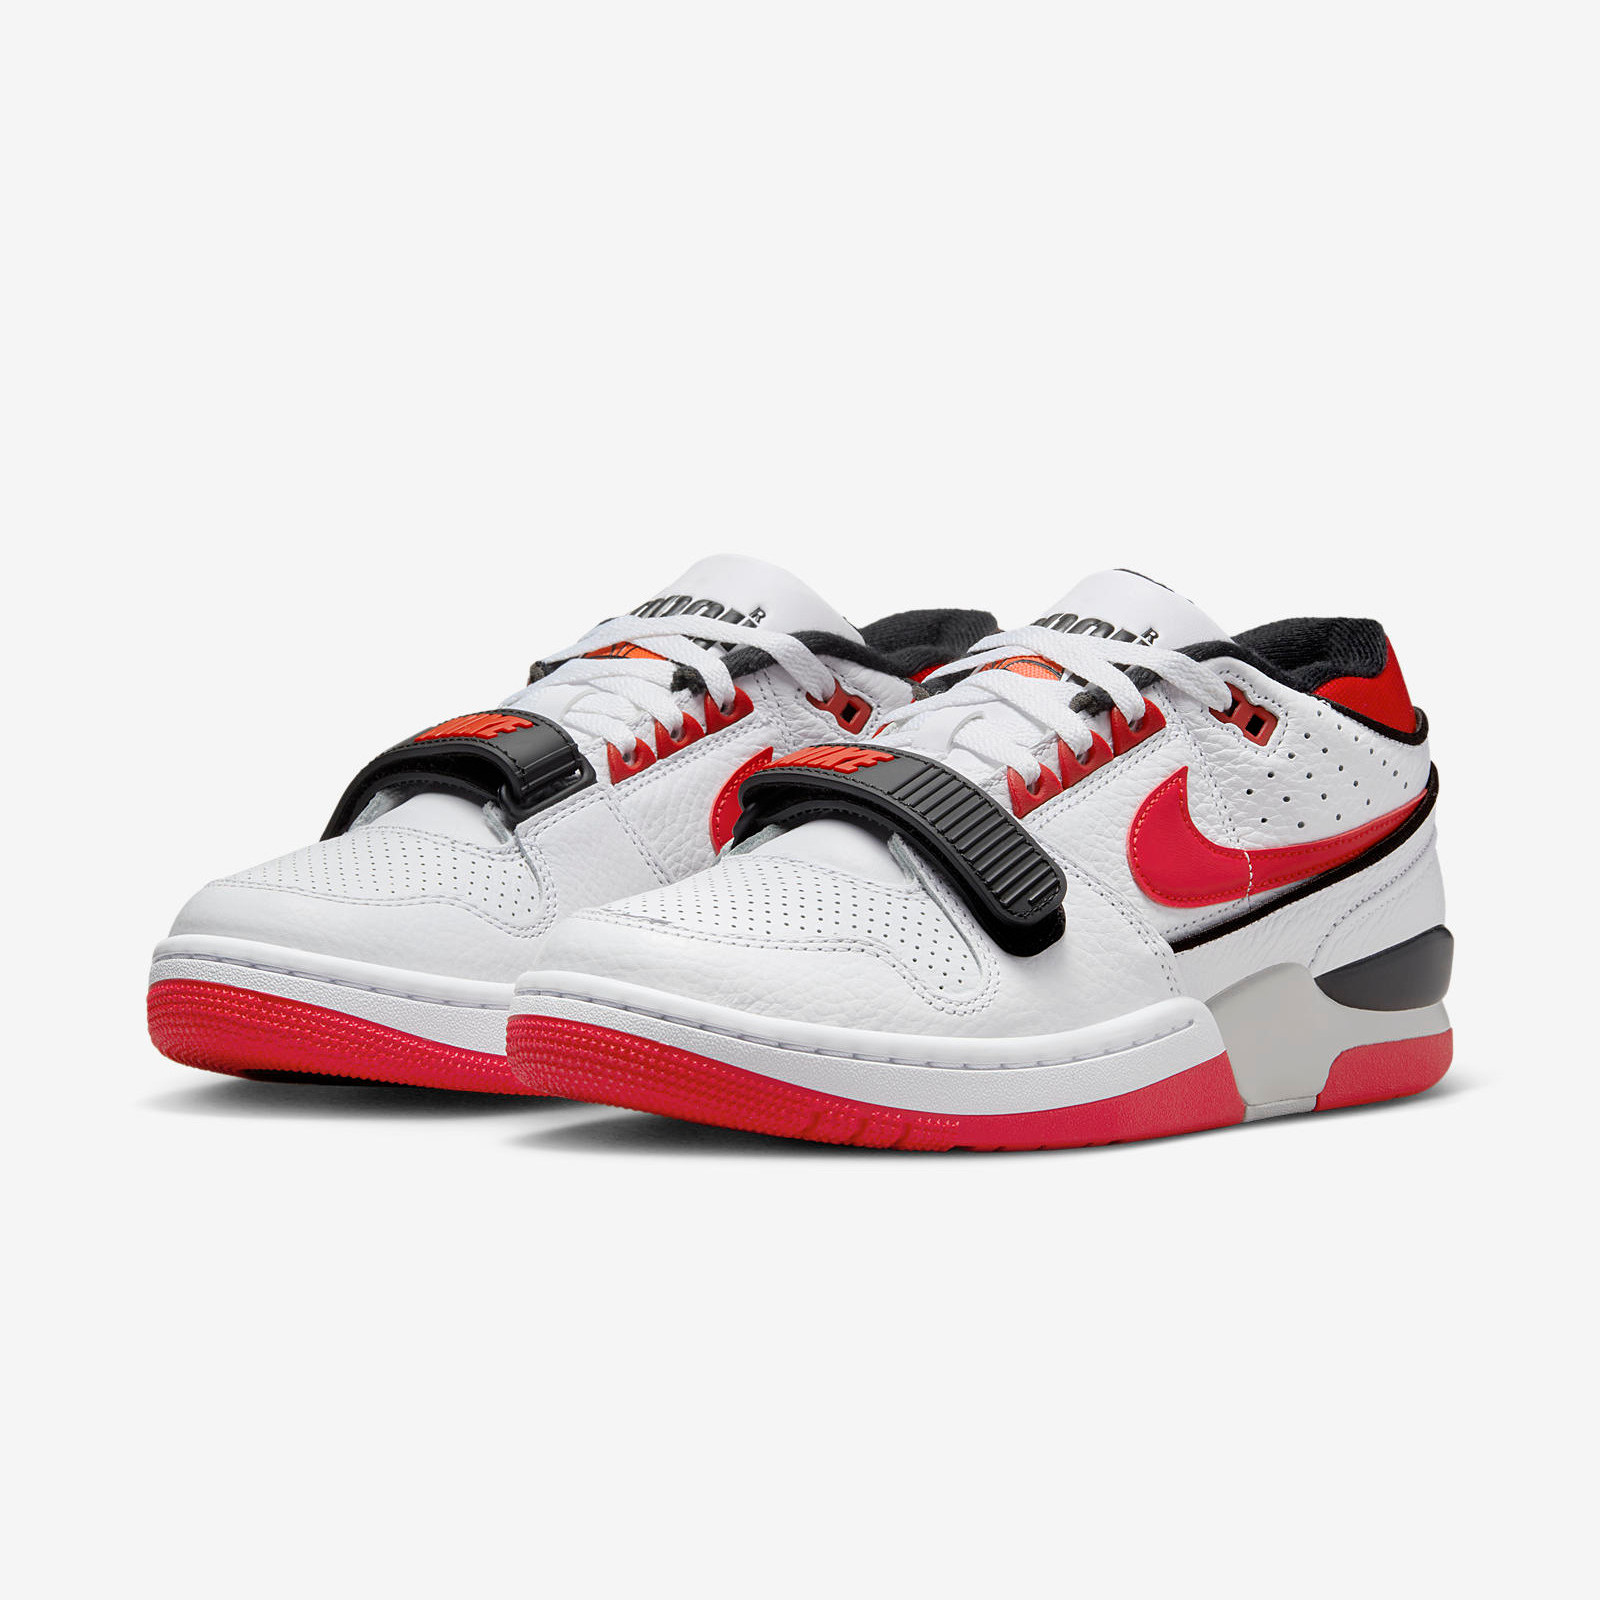 Nike Air Alpha Force 88
Red / White